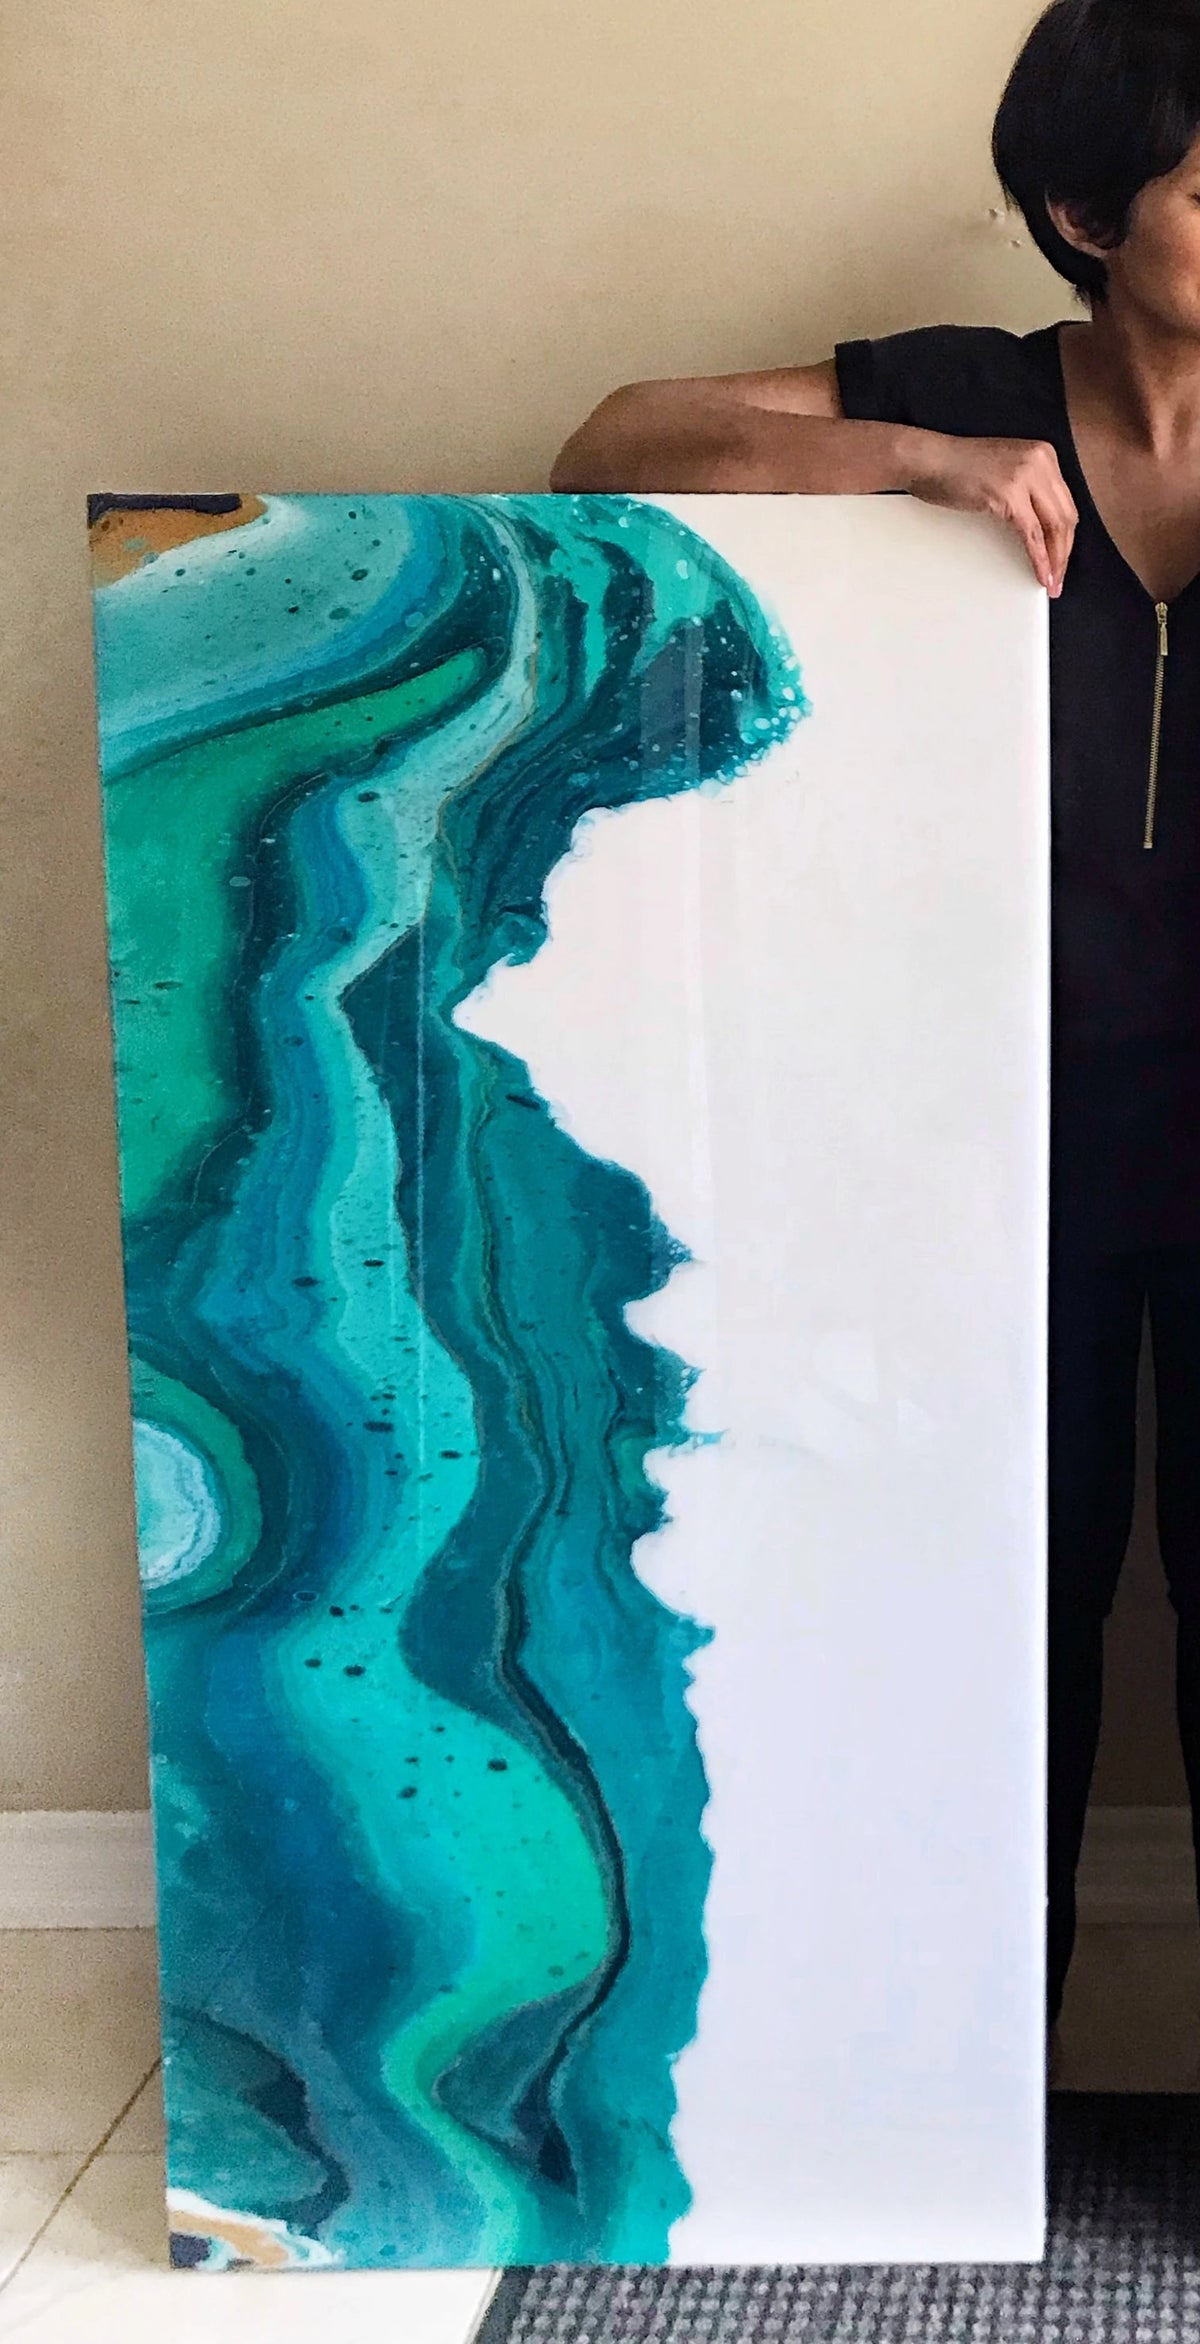 Original Paintings - "Water Hills I & II" - Acrylic painting with Resin finish